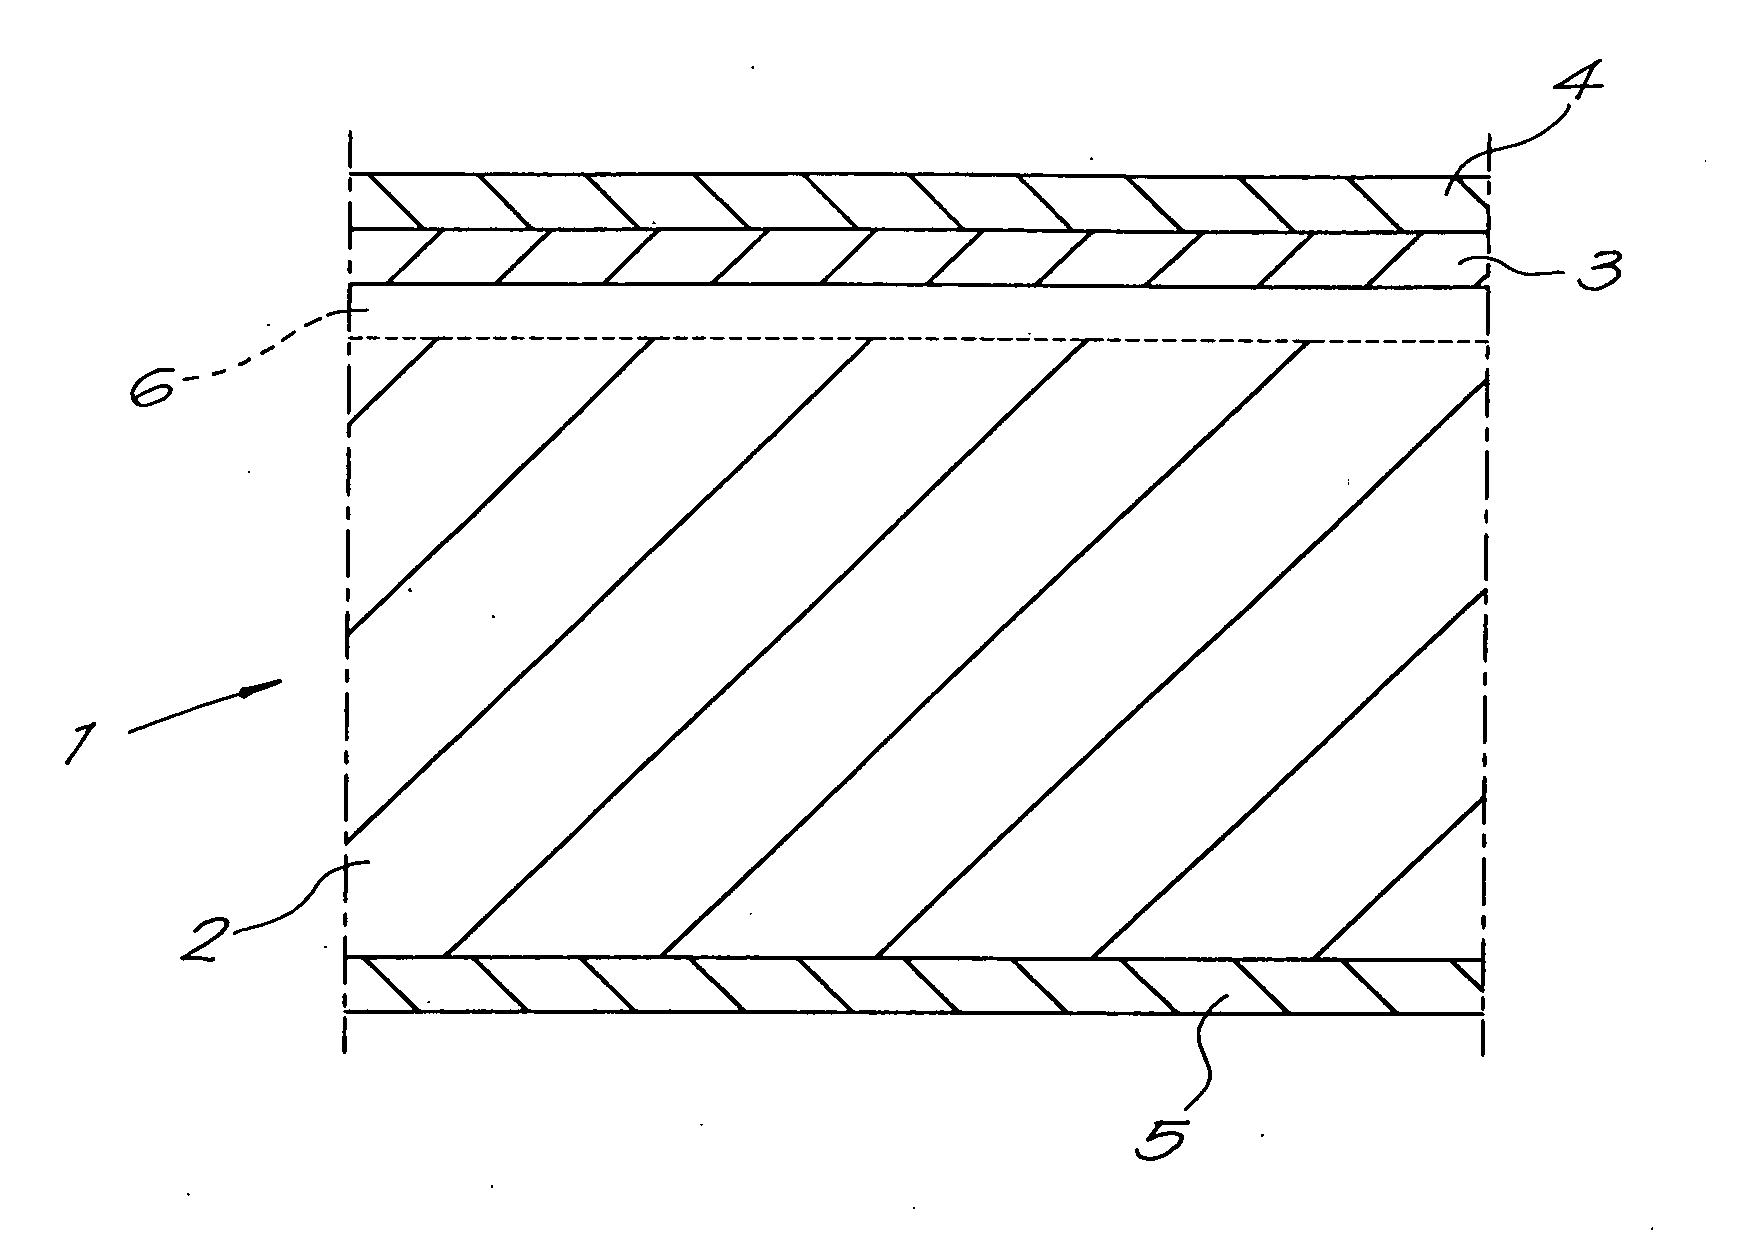 Antistatic layered panel and method of its manufacture